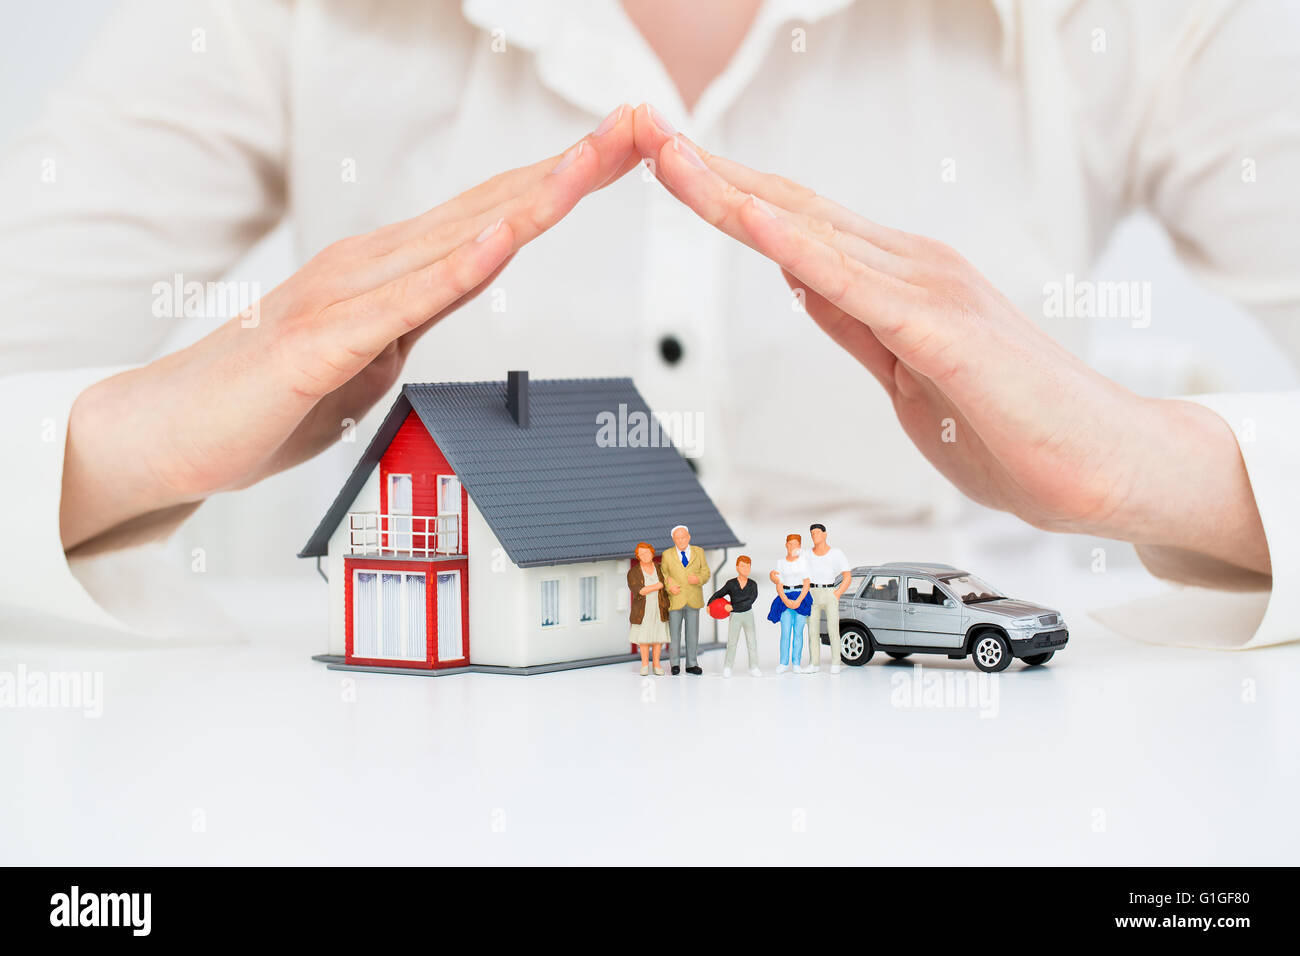 Insurance Home House Live Car Protection Protect Concepts Stock Photo